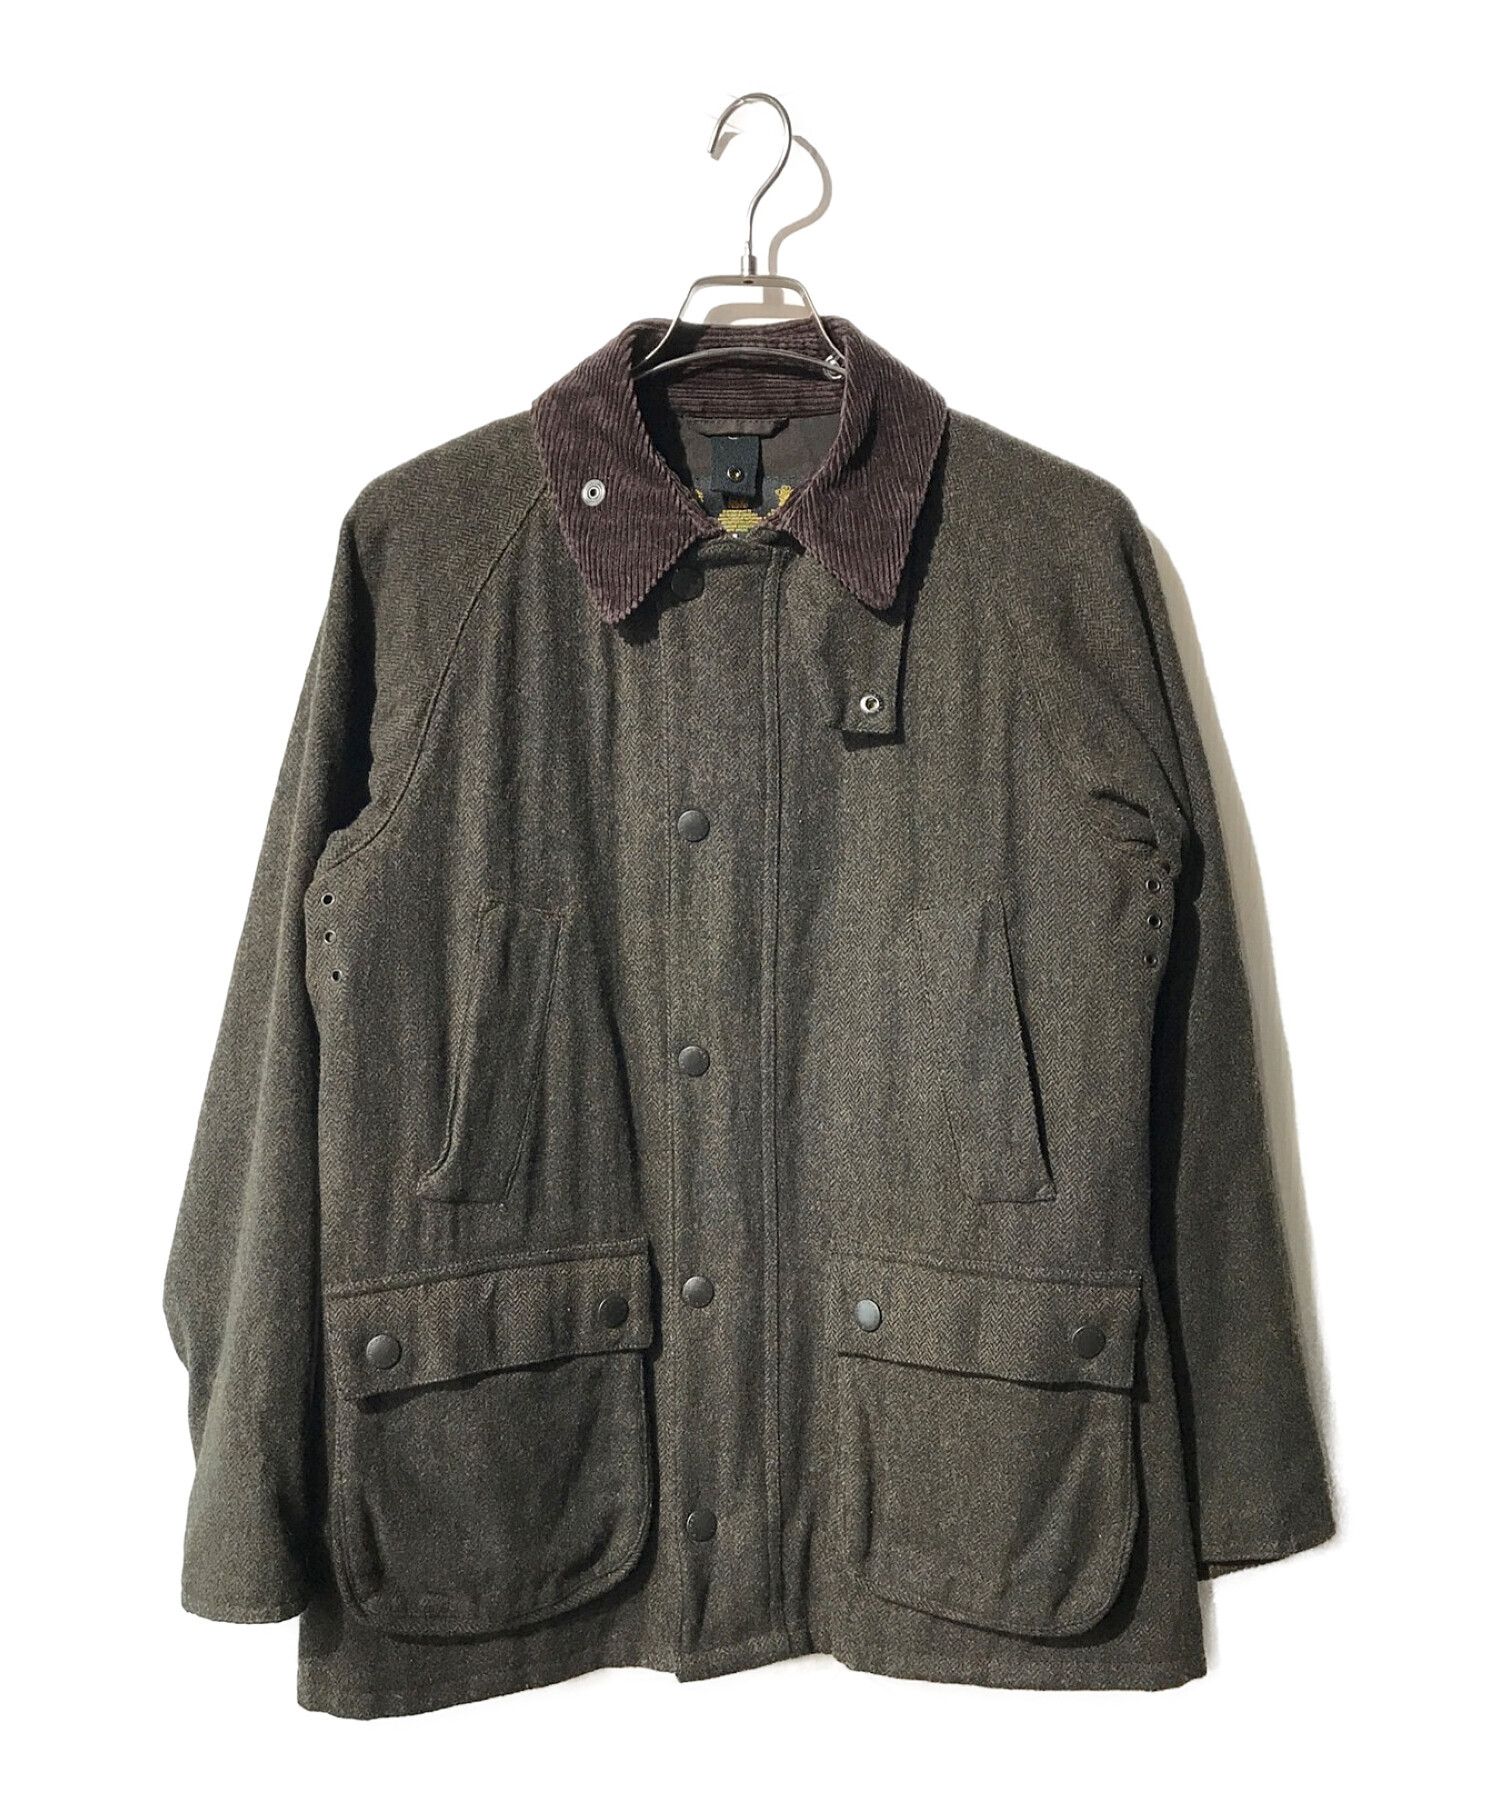 Barbour 3CROWN BEDALE SL WAXED JACKET 36付属品すべてあり